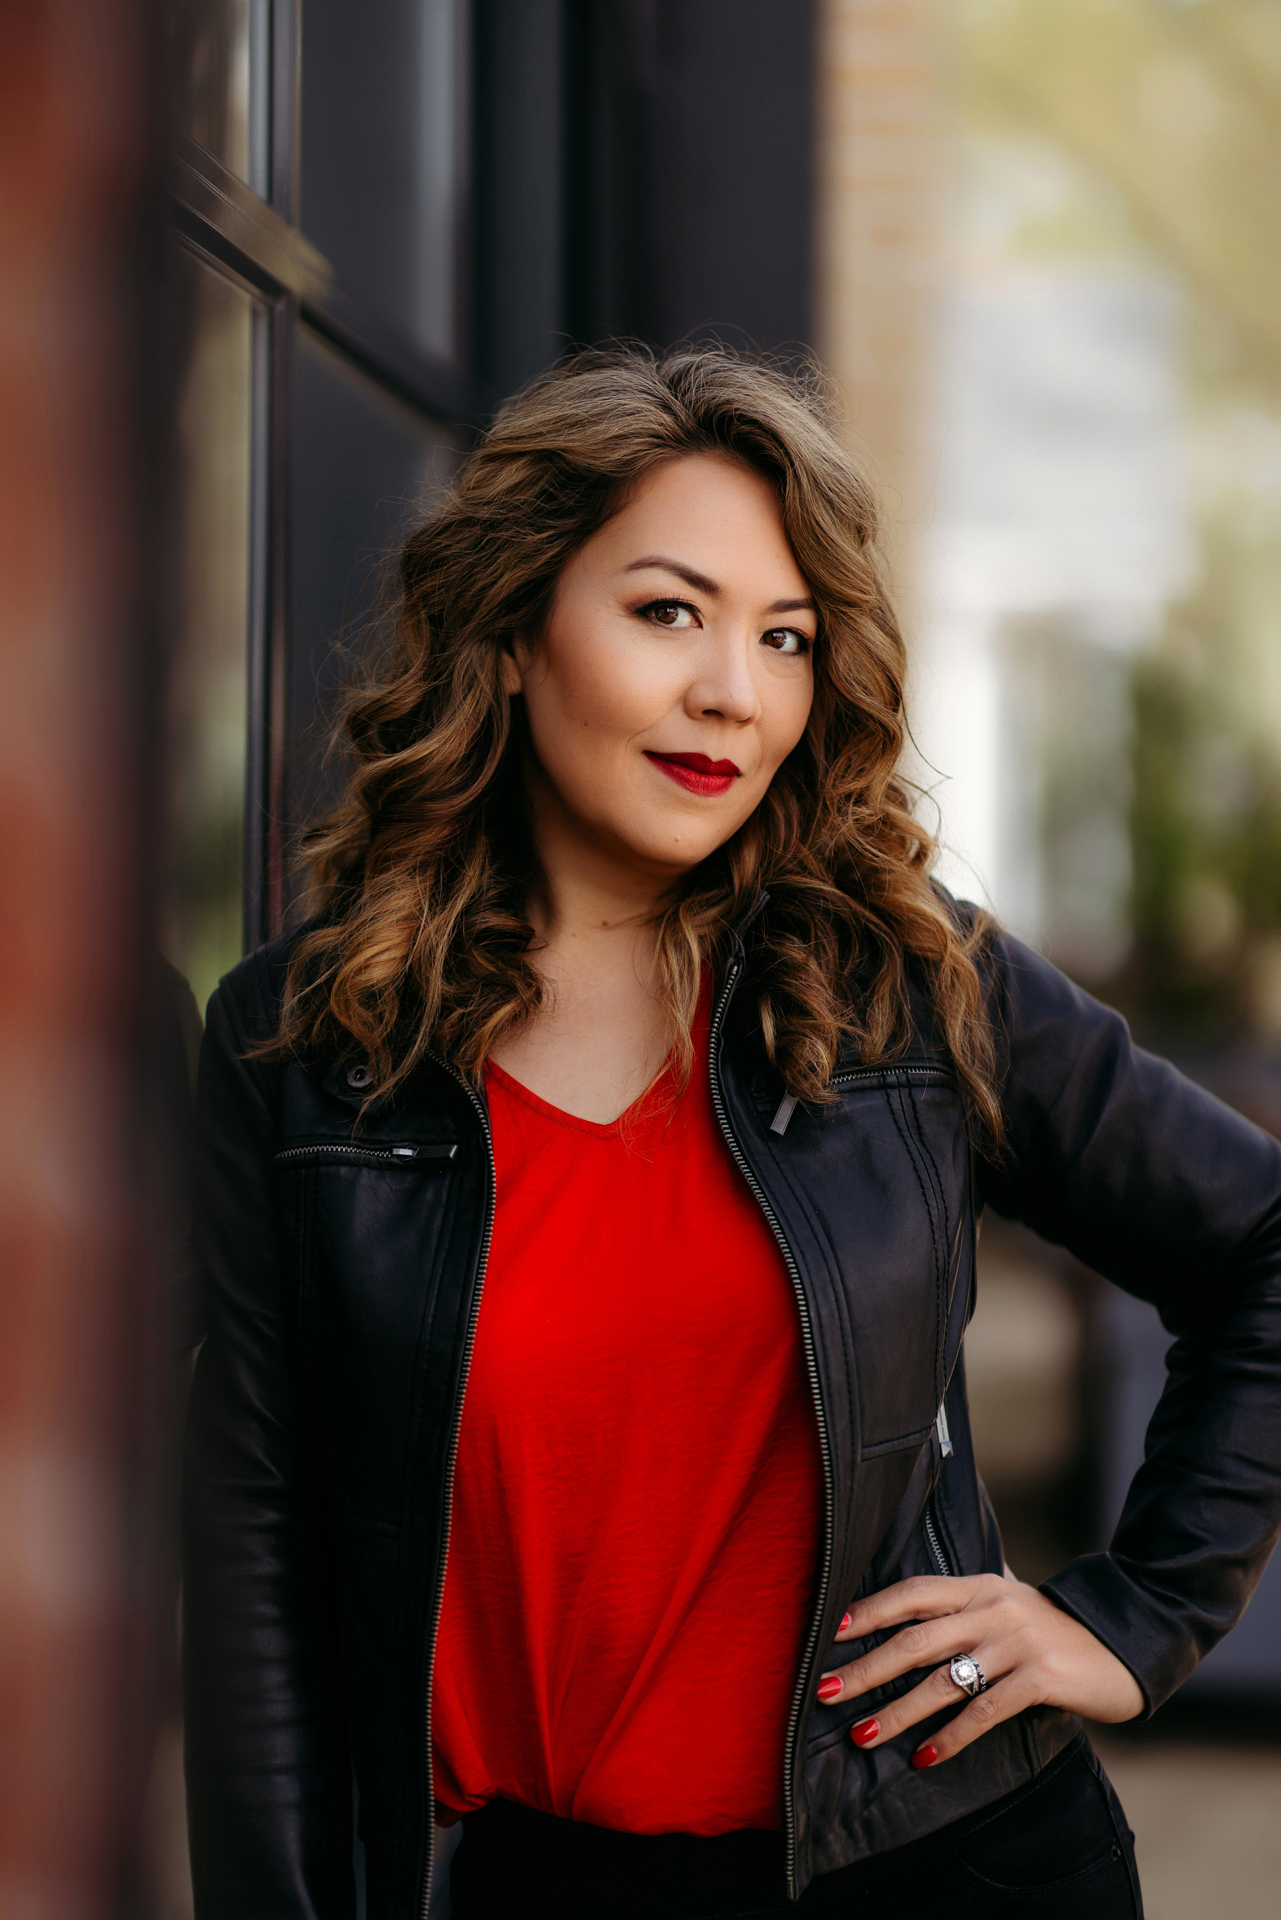 Professional opera singer headshot of woman in red shirt and leather jacket